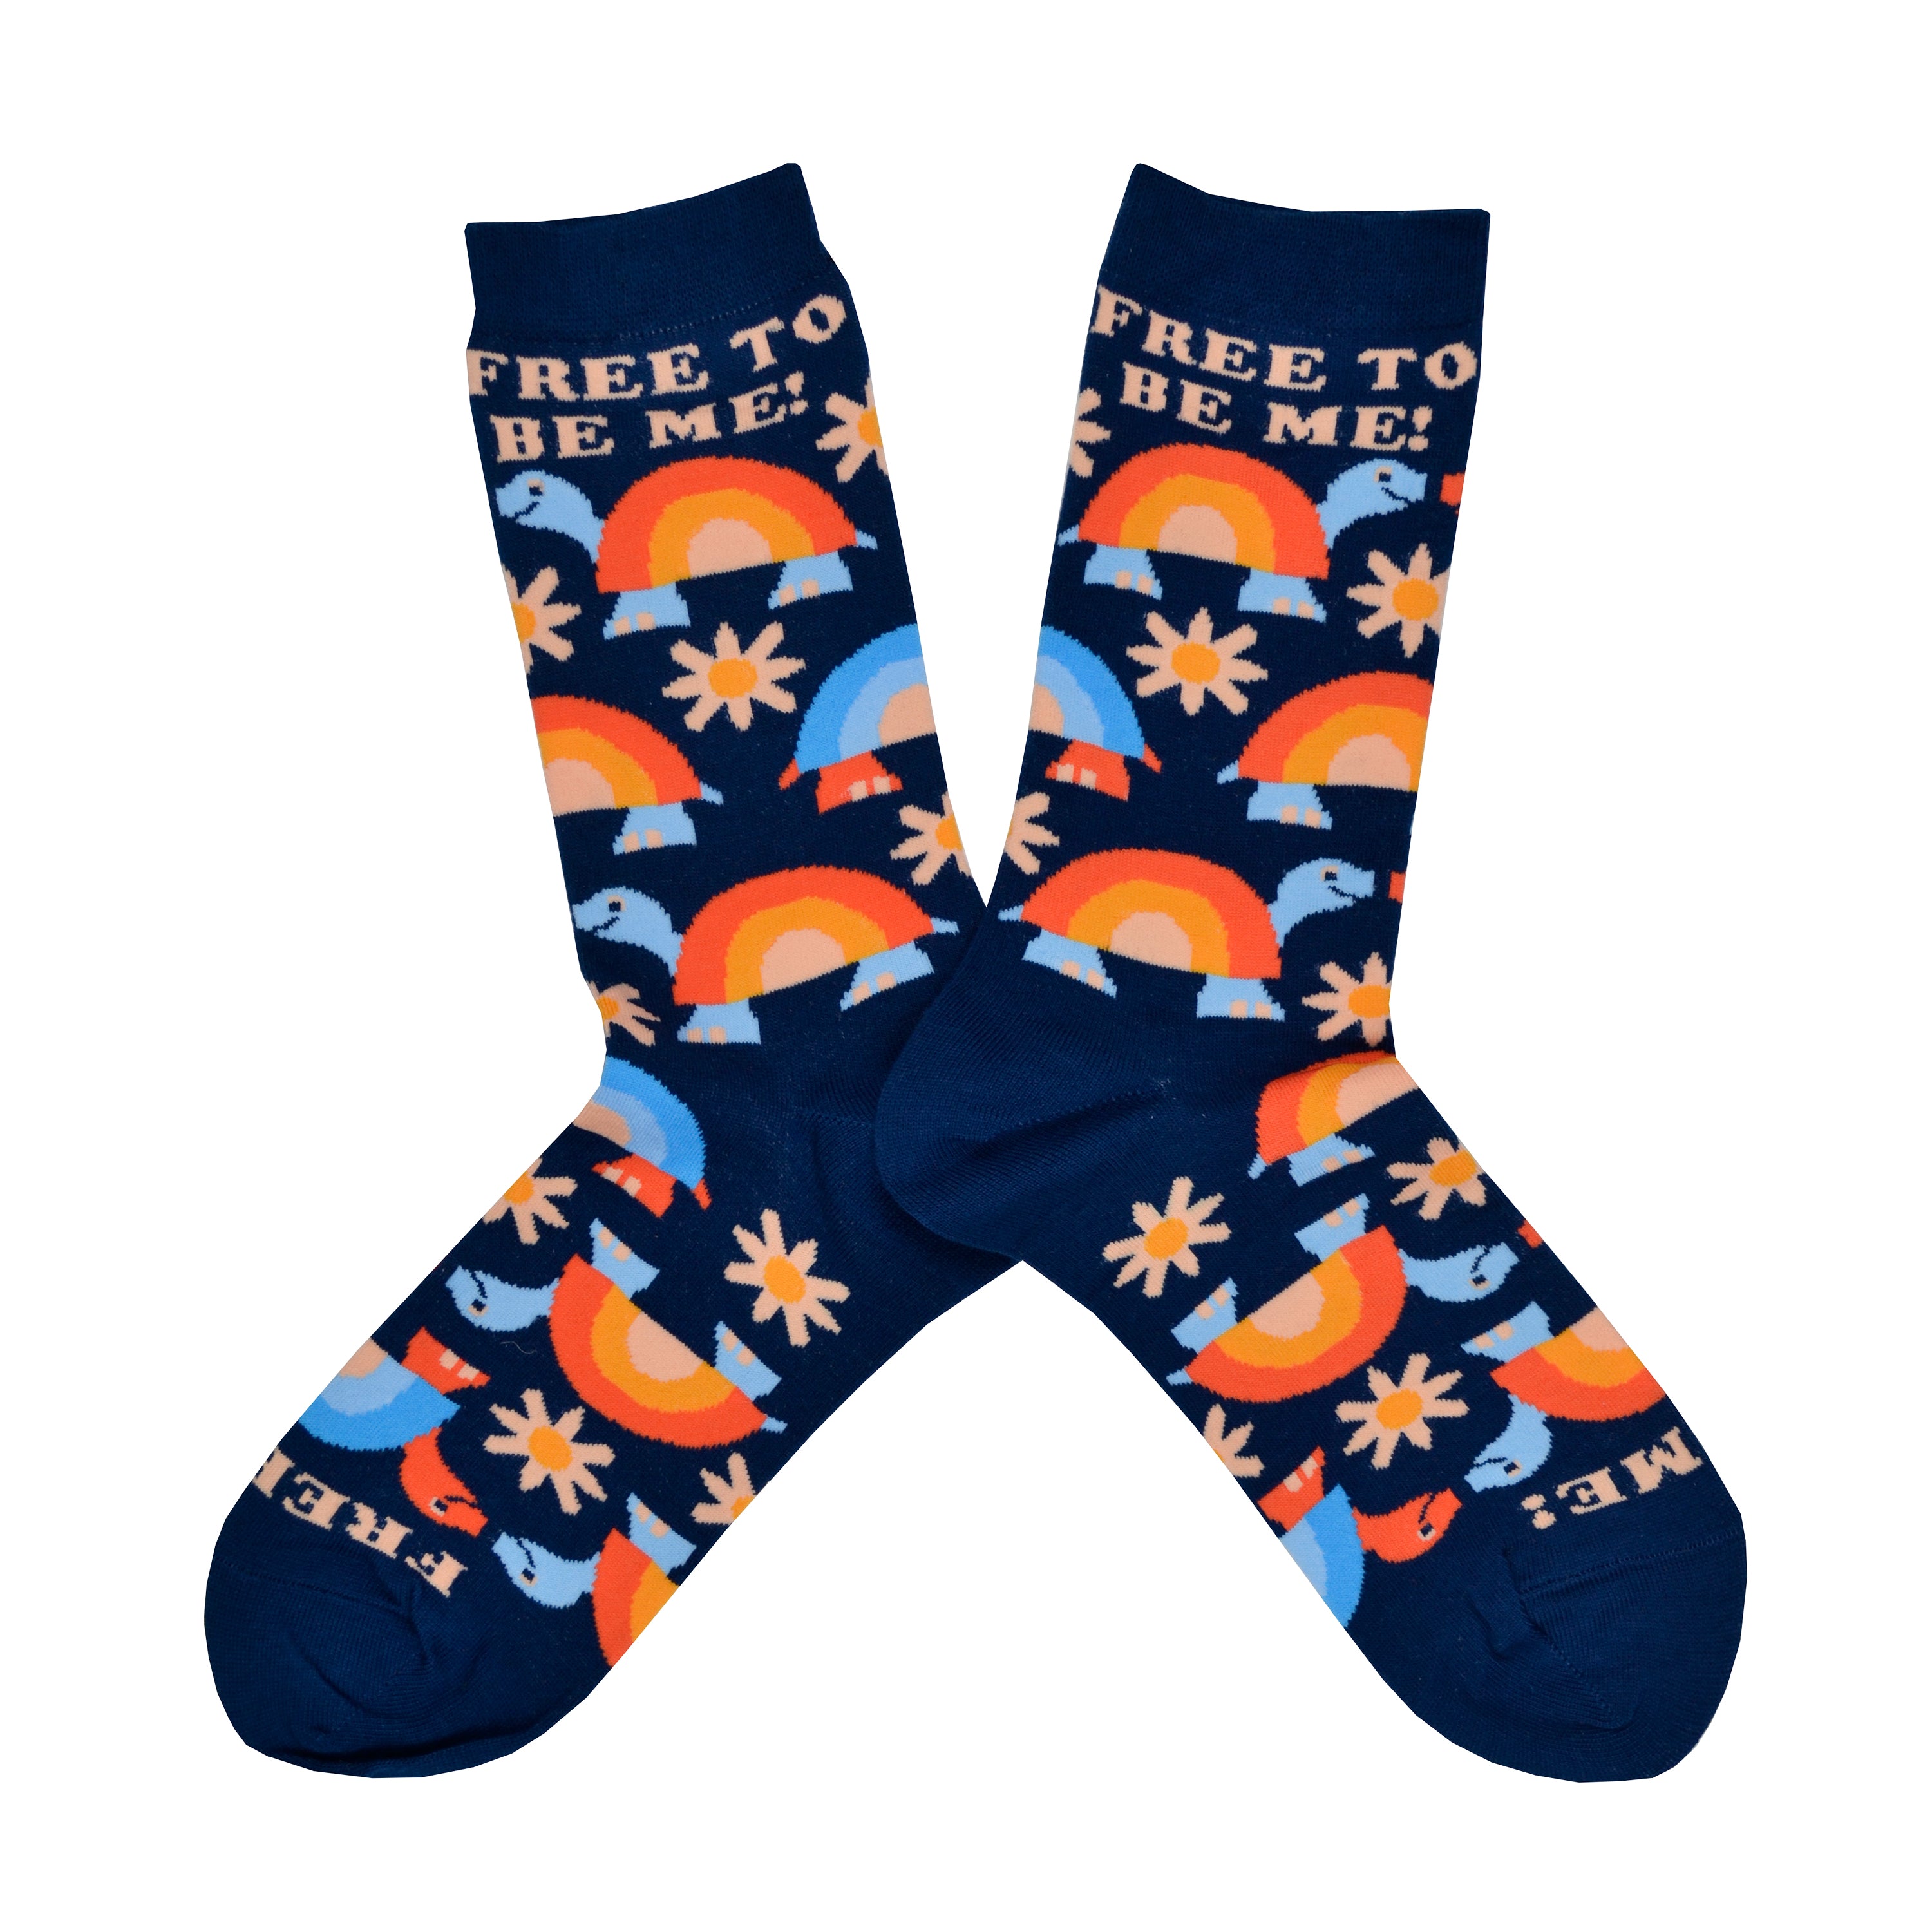 Shown in a flatlay, a pair of women's Yellow Owl Workshop brand cotton and nylon socks in navy blue with orange and blue rainbow shelled turtles and orange daisies and the words 